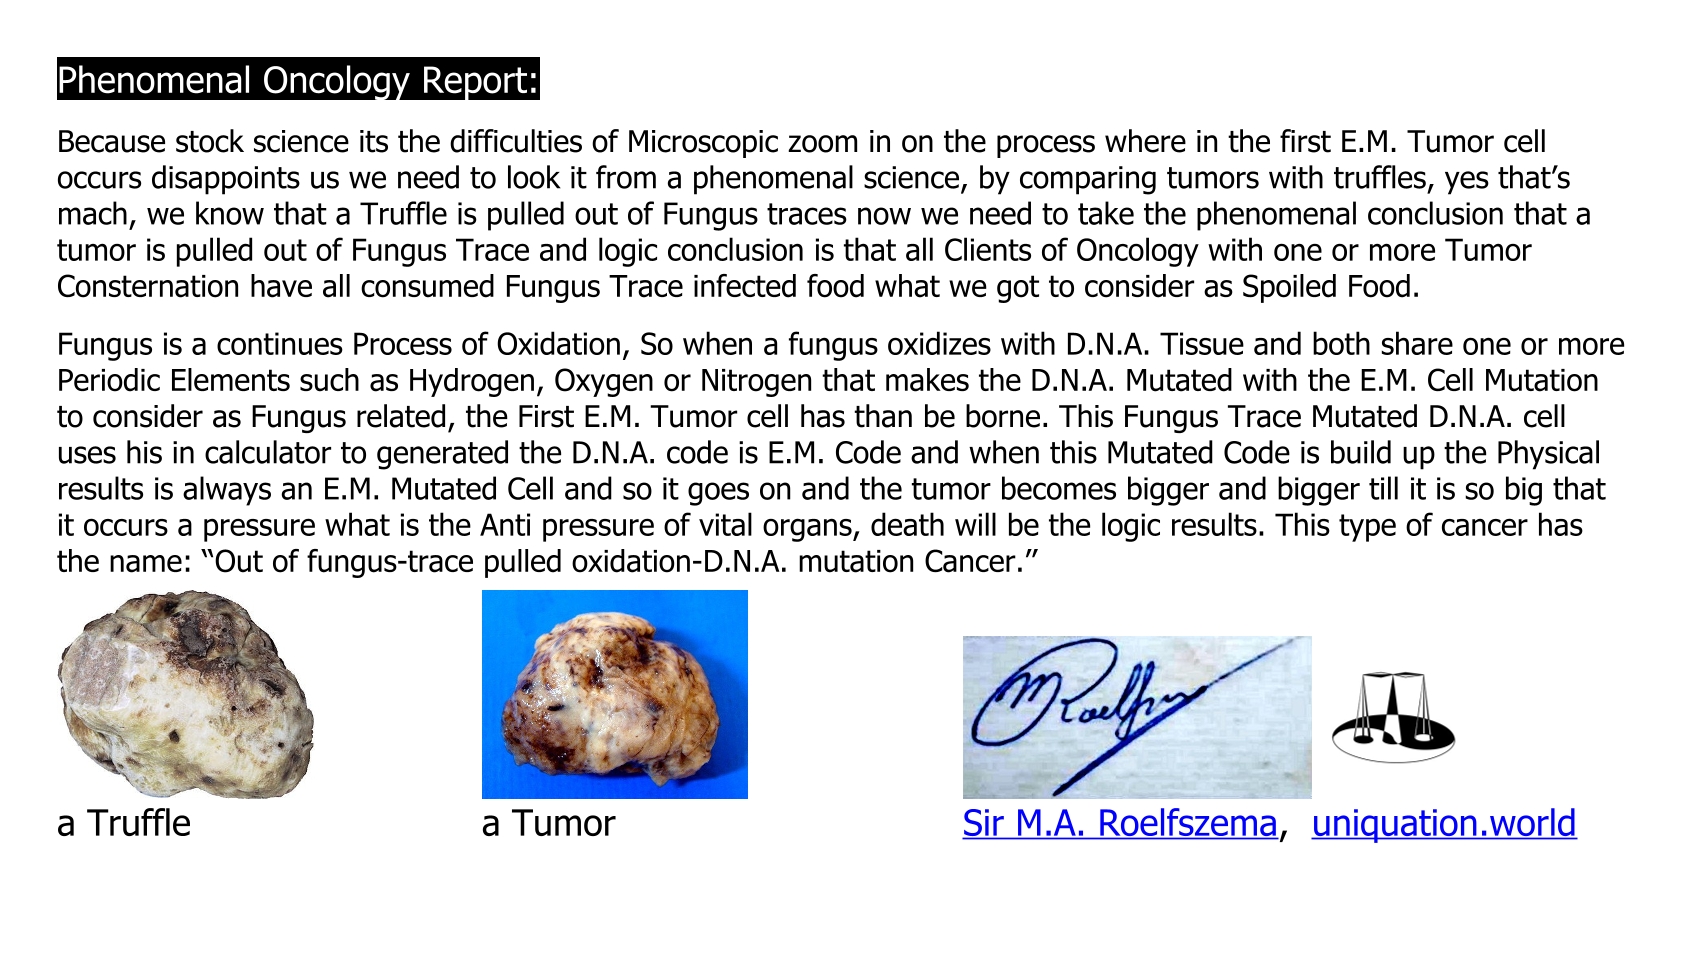 Out of Fungus-trace pulled Oxidation-D.N.A. Mutation Cancer